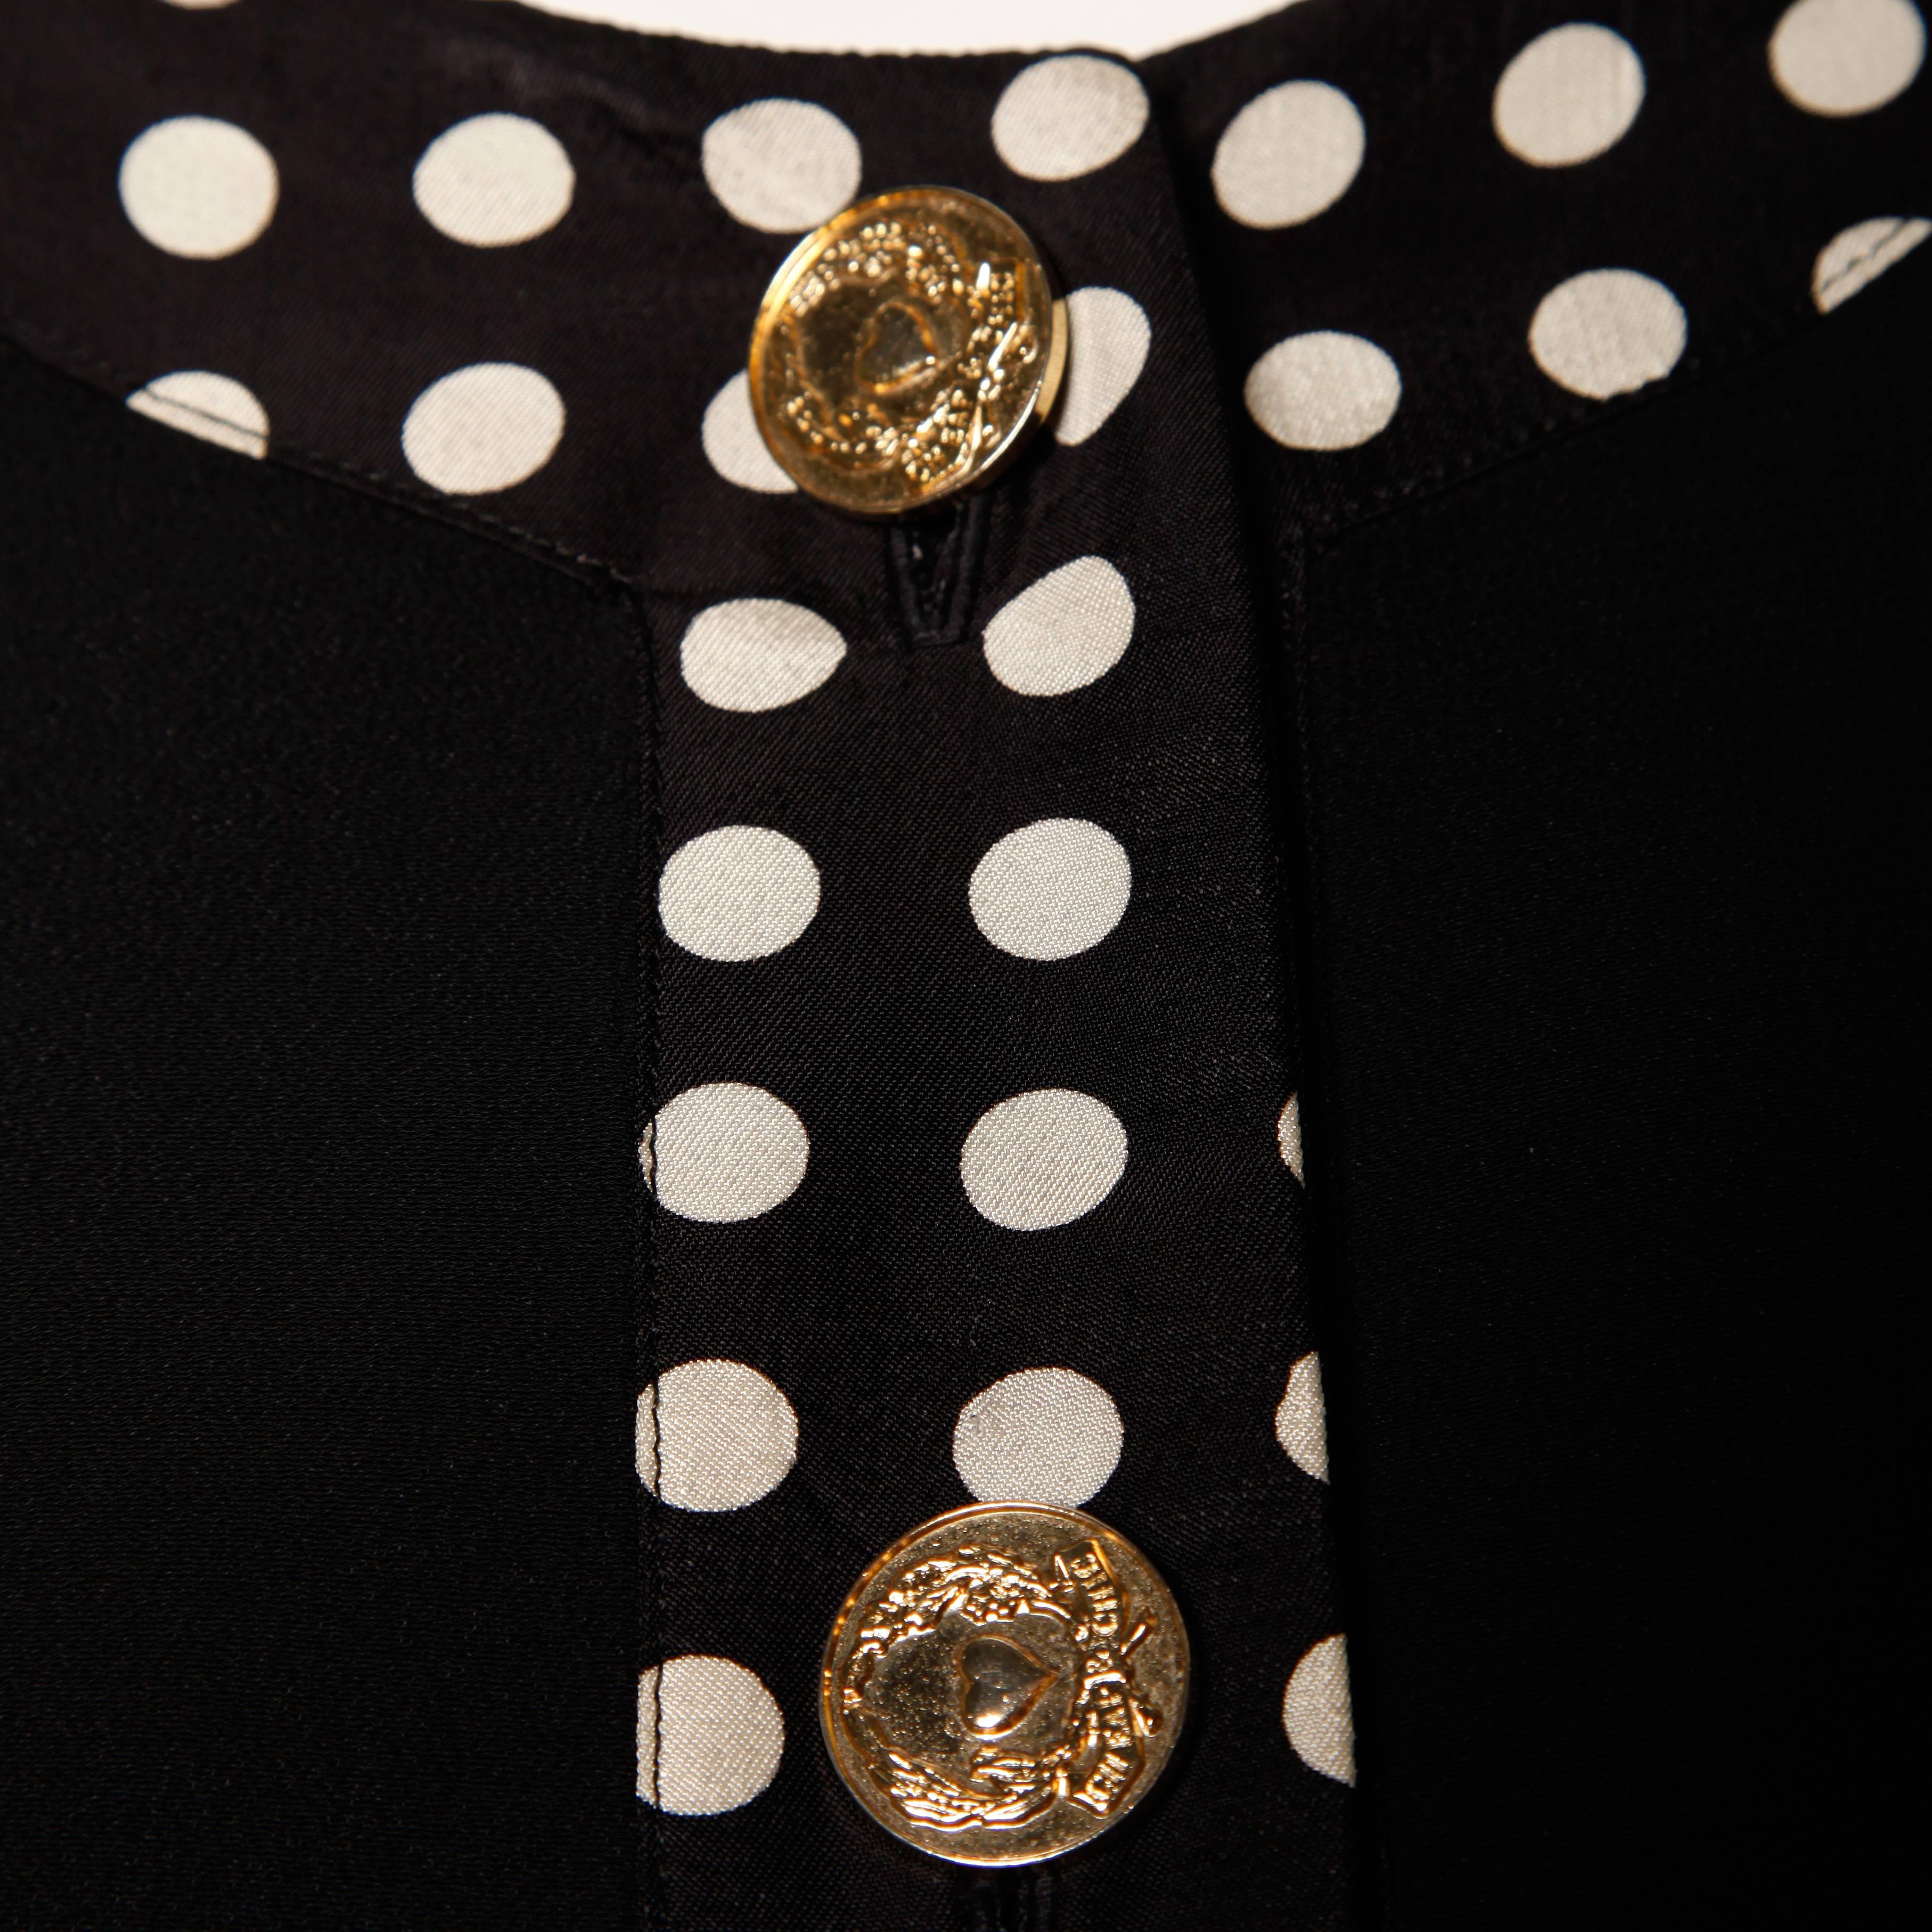 Moschino Vintage 90s Black + White Polka Dot Jacket with Gold Buttons 2